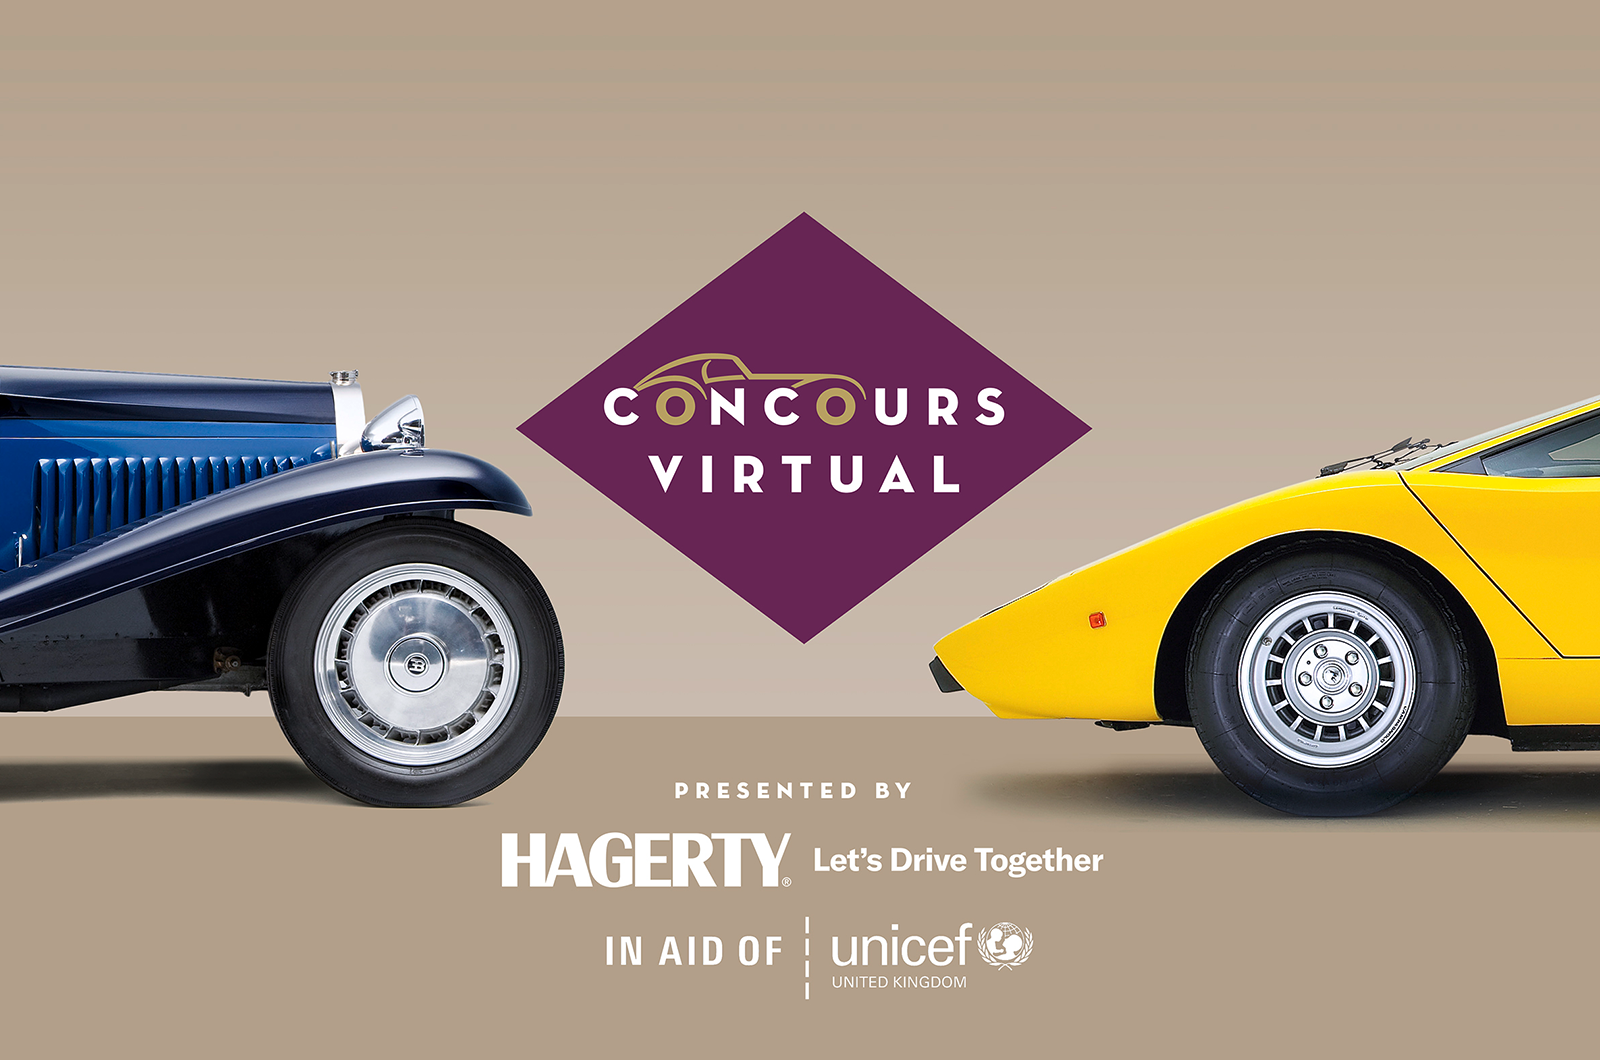 Classic & Sports Car – Virtual classic and supercar concours launched in aid of Unicef